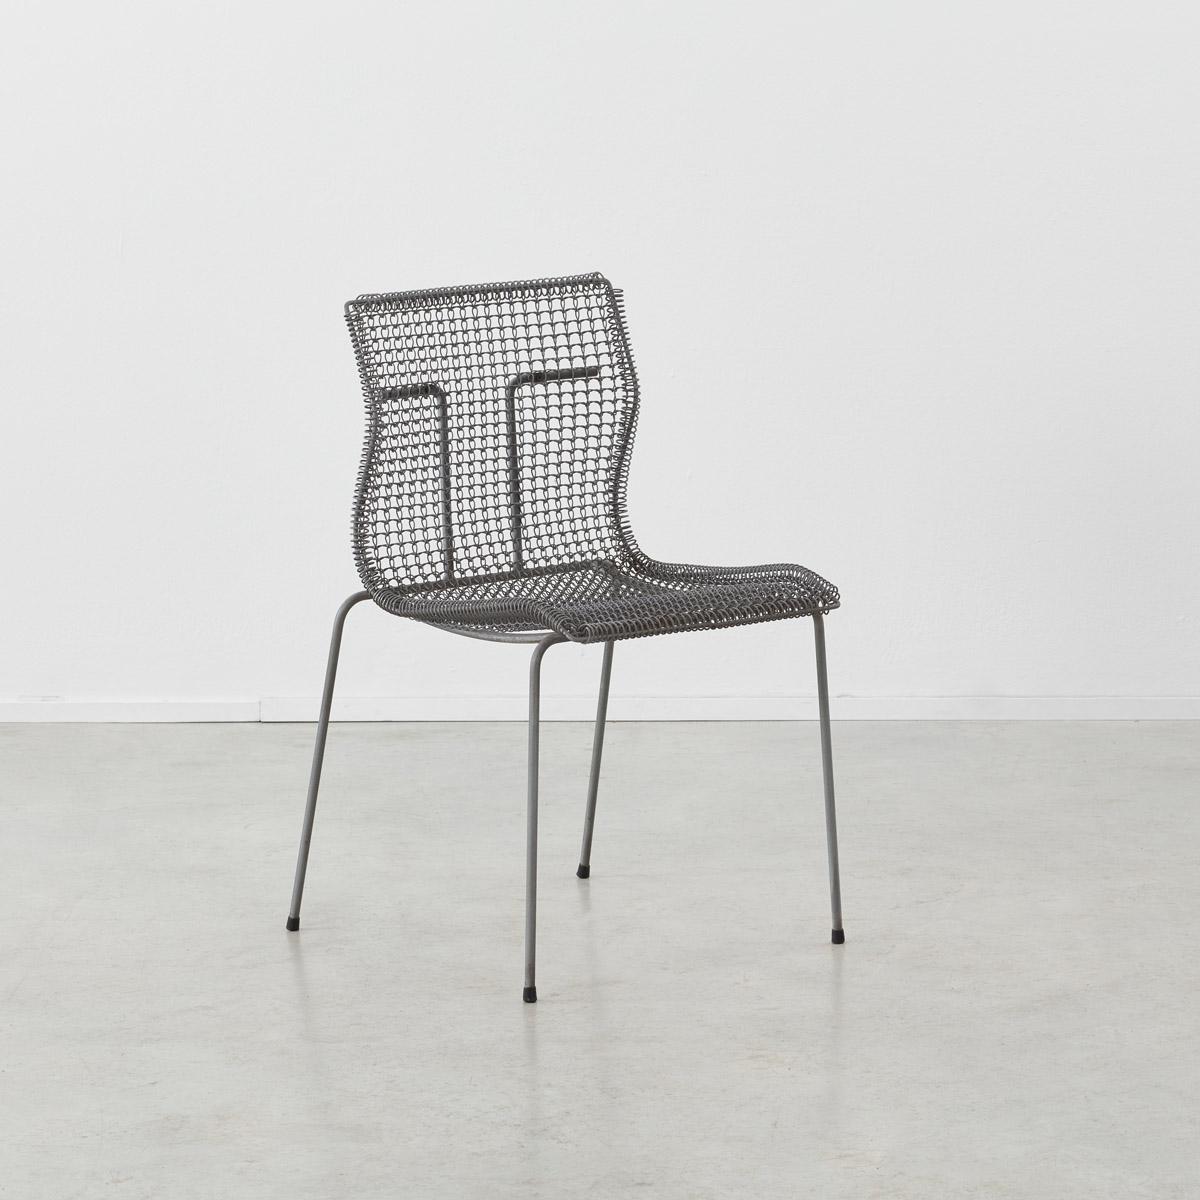 The Rascal chair was designed by Niall O’Flynn (1959-present) for Dutch manufacturer ‘t Spectrum Bergeijk. It is comprised of a tubular galvanized metal frame and a woven metal seat. An intelligent use of minimalistic and industrial materials, the